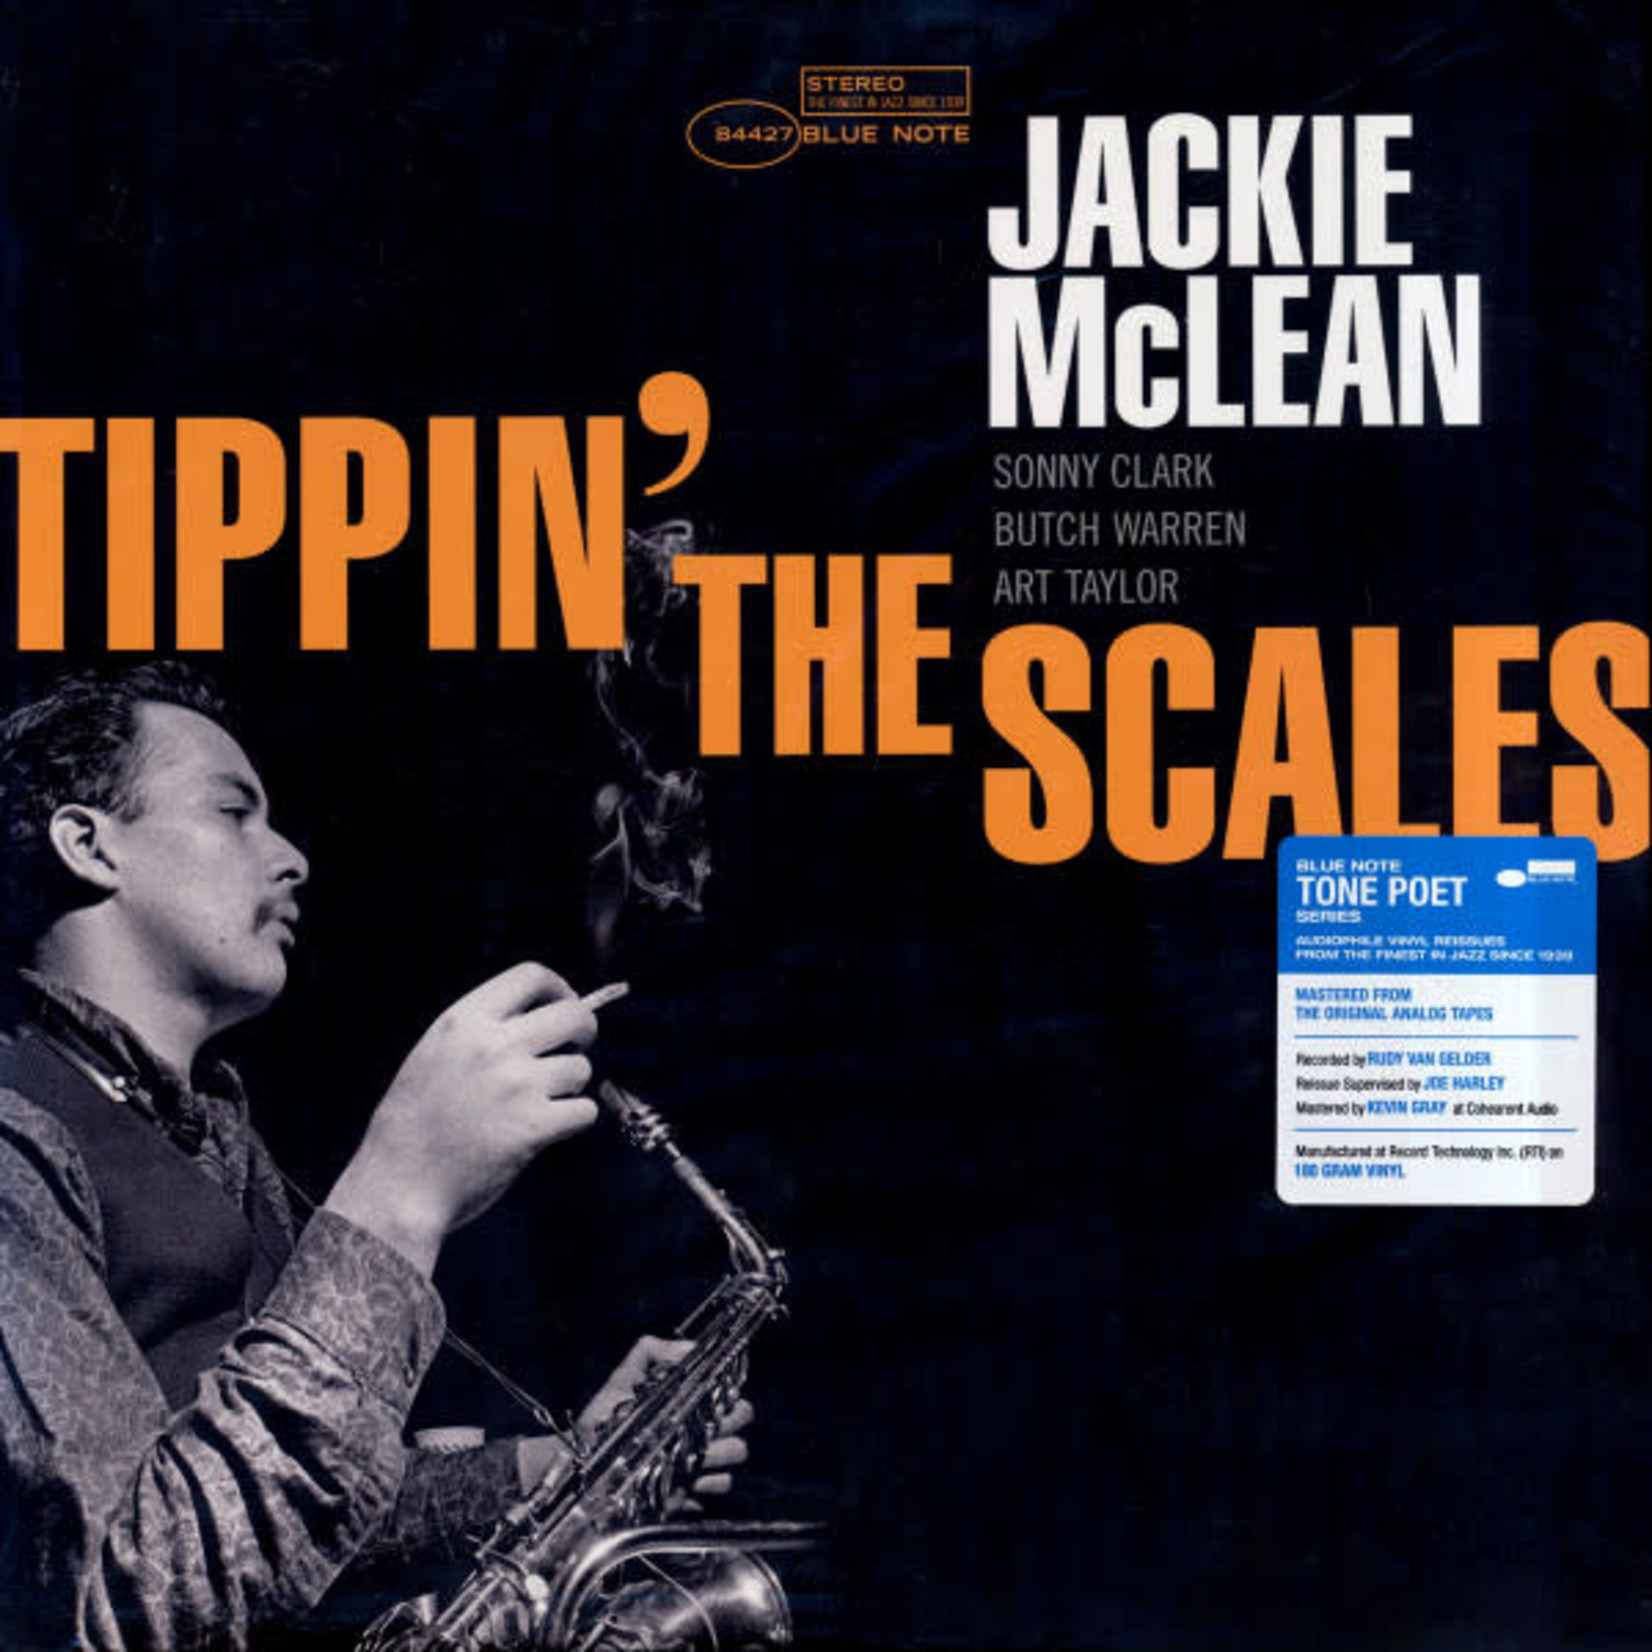 [New] Jackie McLean - Tippin' the Scales (Blue Note Tone Poet Series)